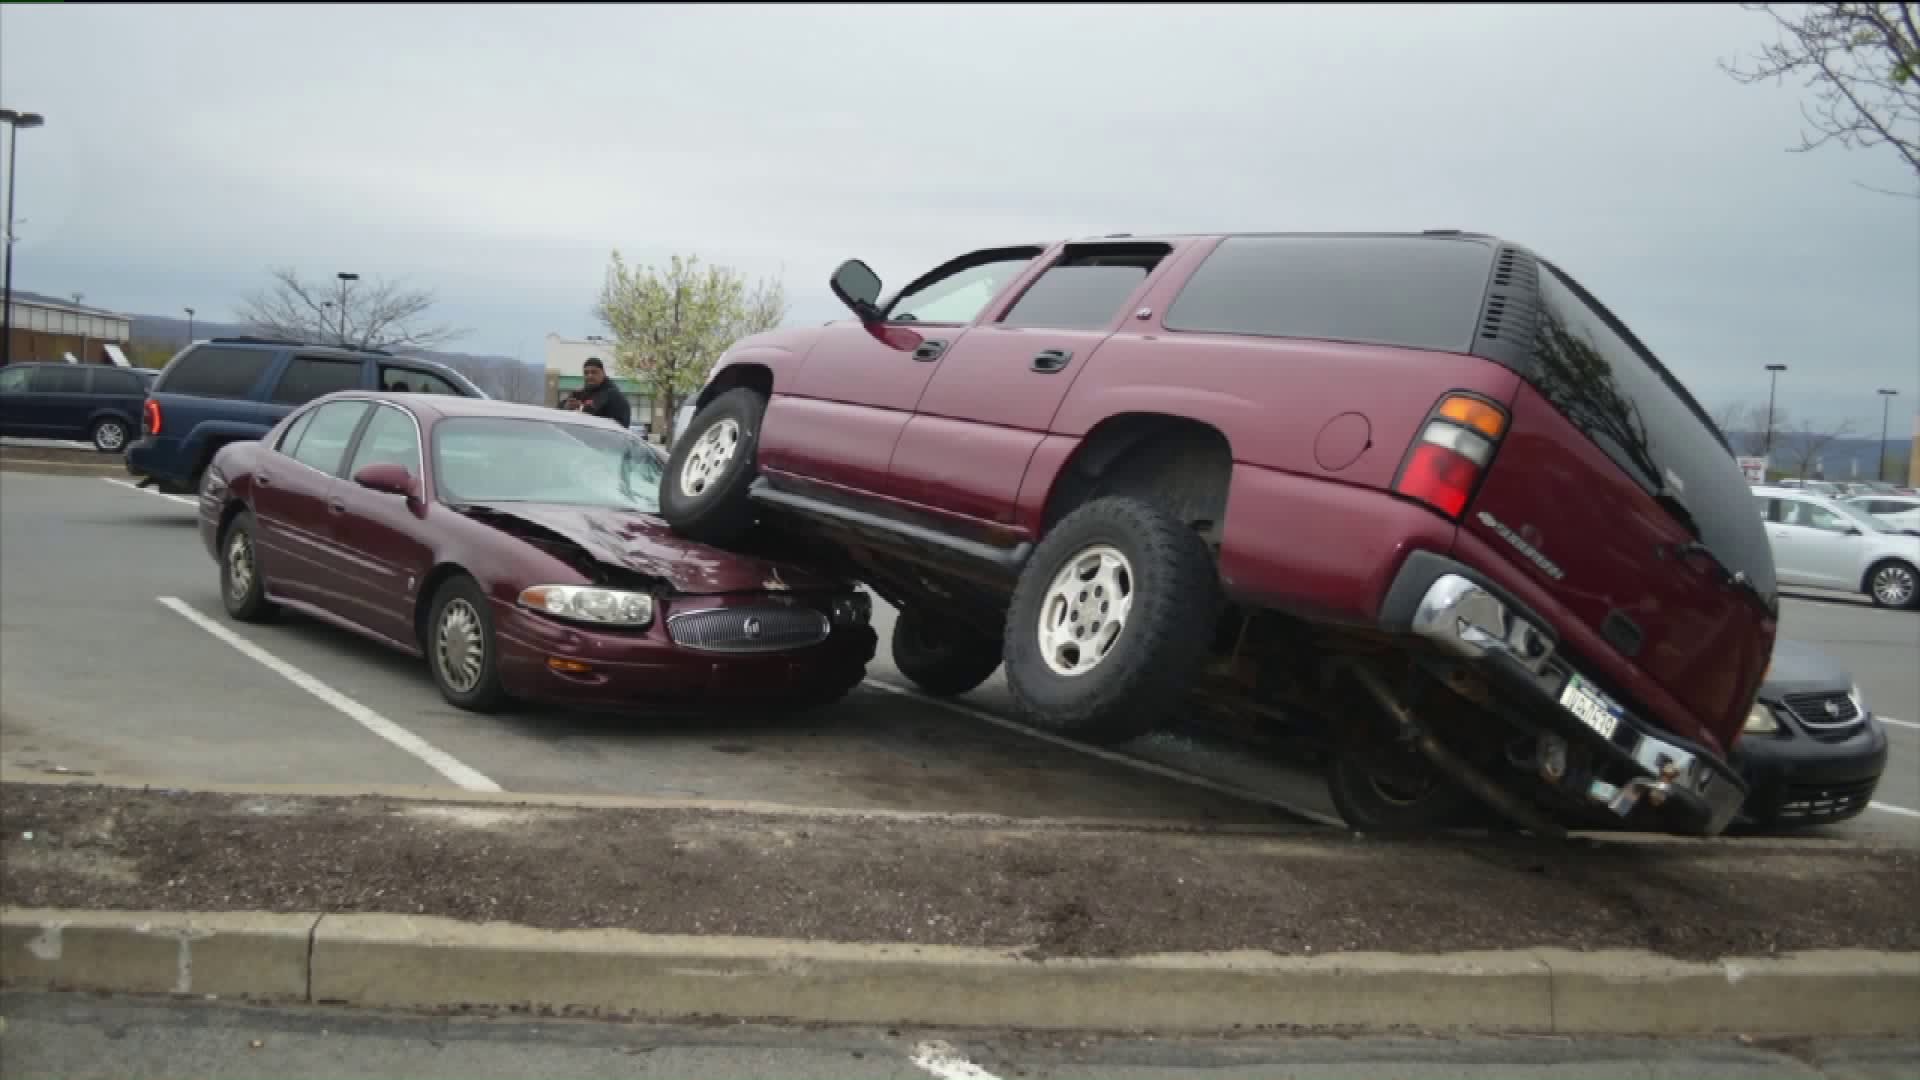 Driver Lands SUV Onto Other Vehicles in Parking Lot